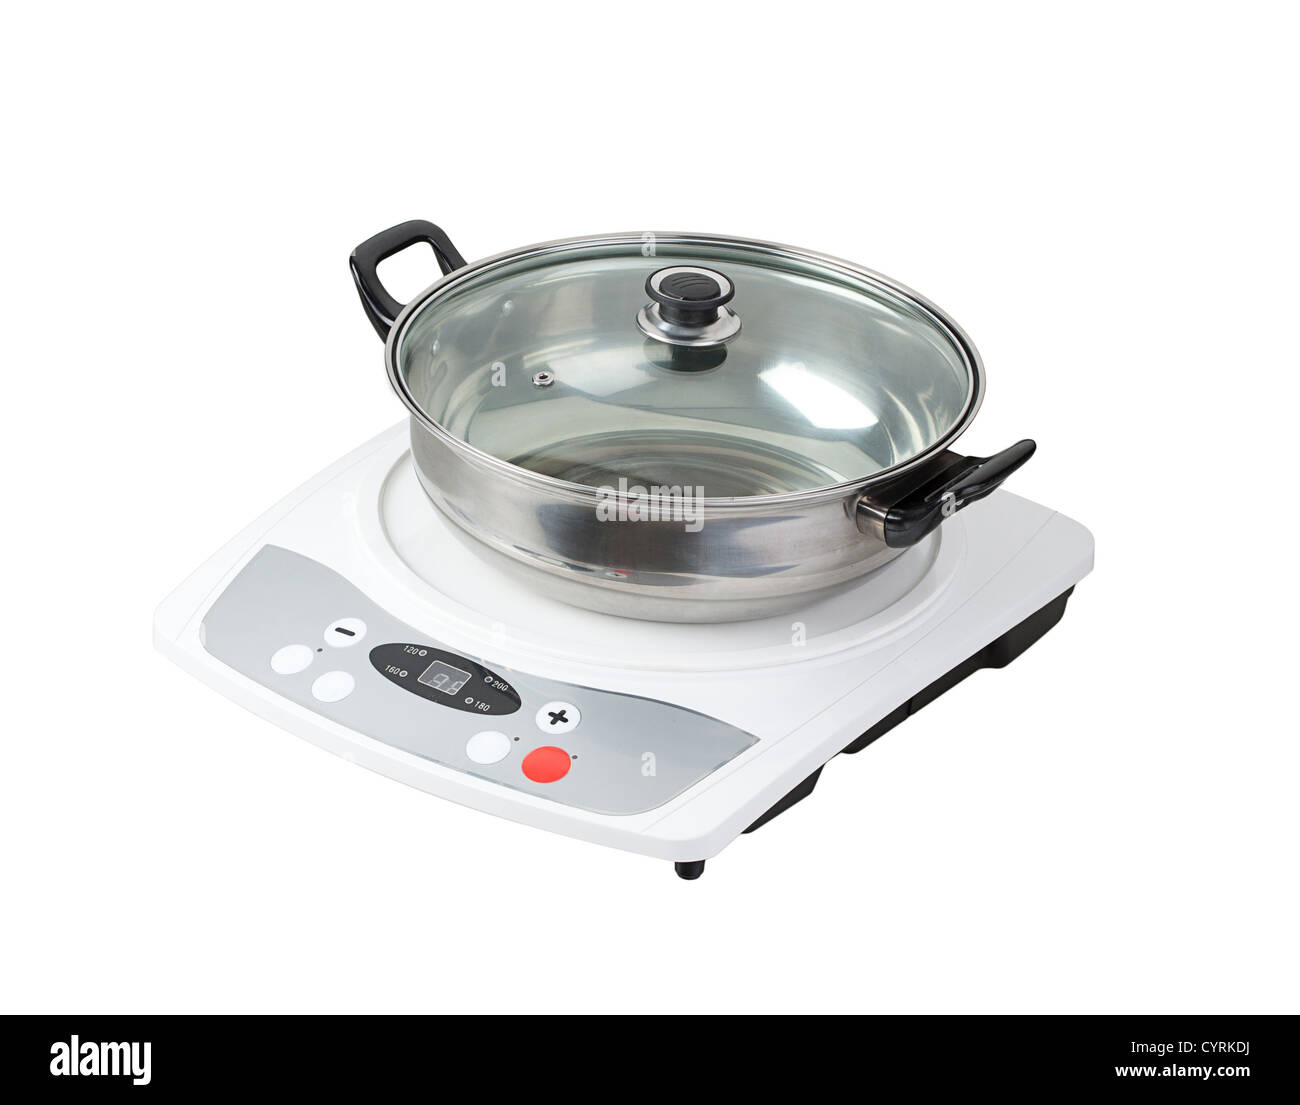 Electric stove with empty pot the necessary kitchenware Stock Photo